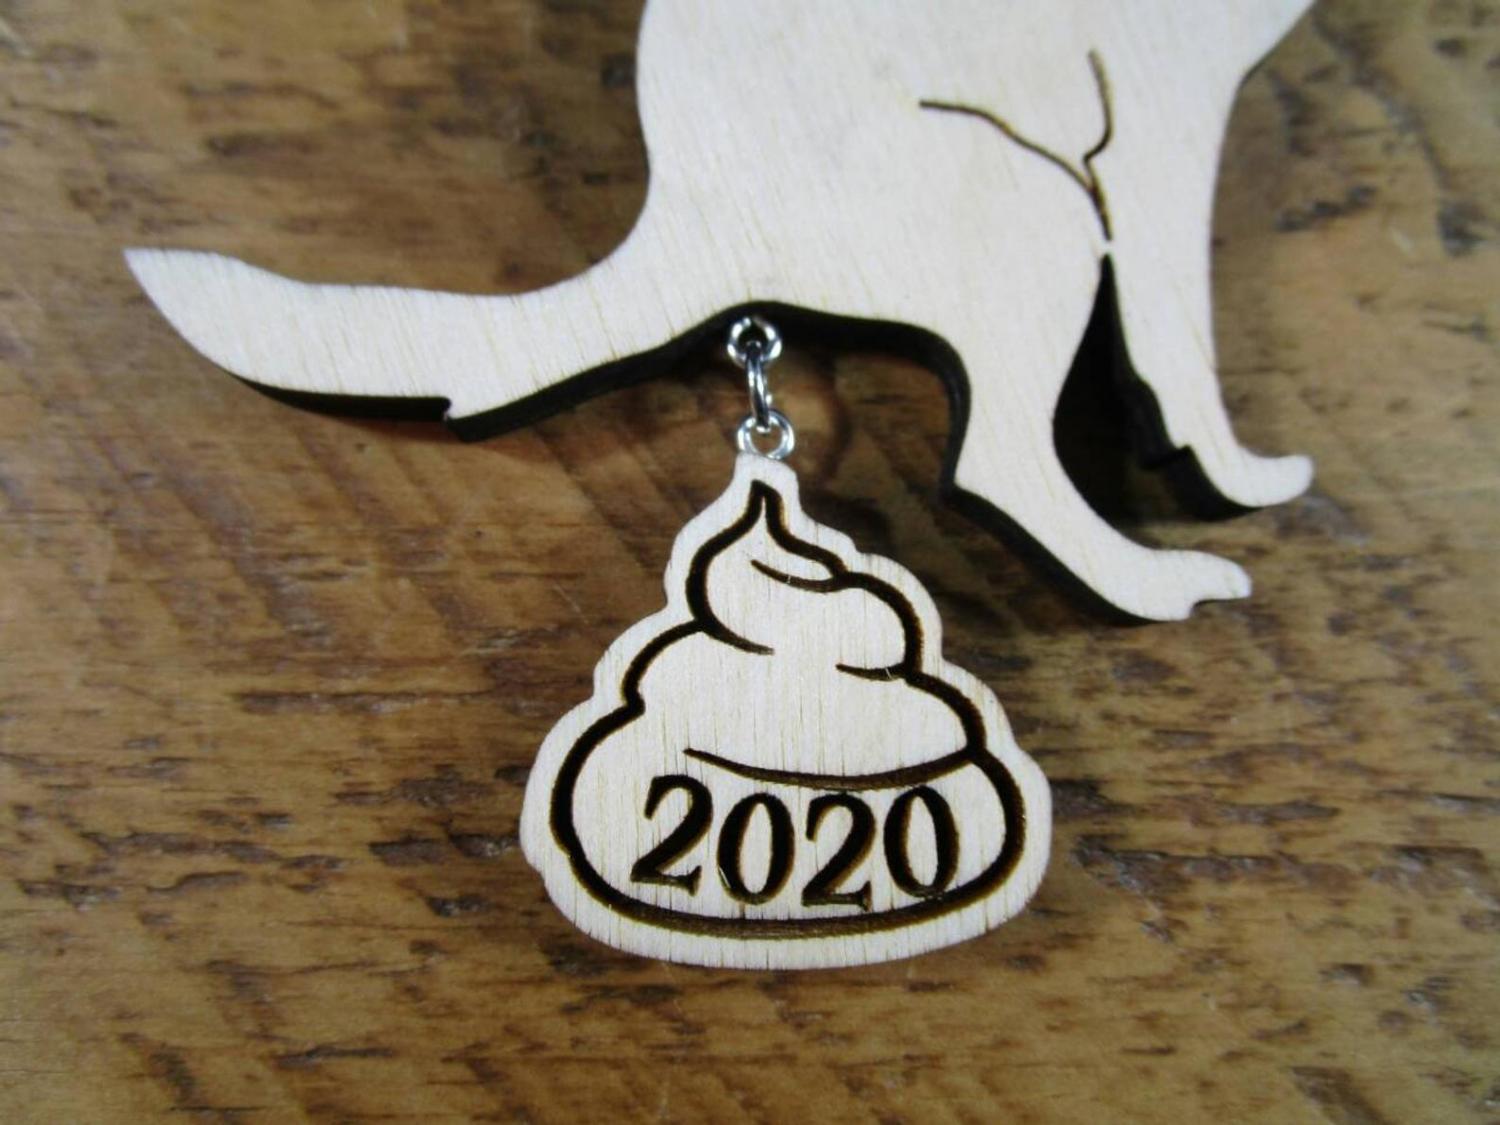 Dog Poop 2020 Christmas Ornament - Funny dog pooping on 2020 ornament